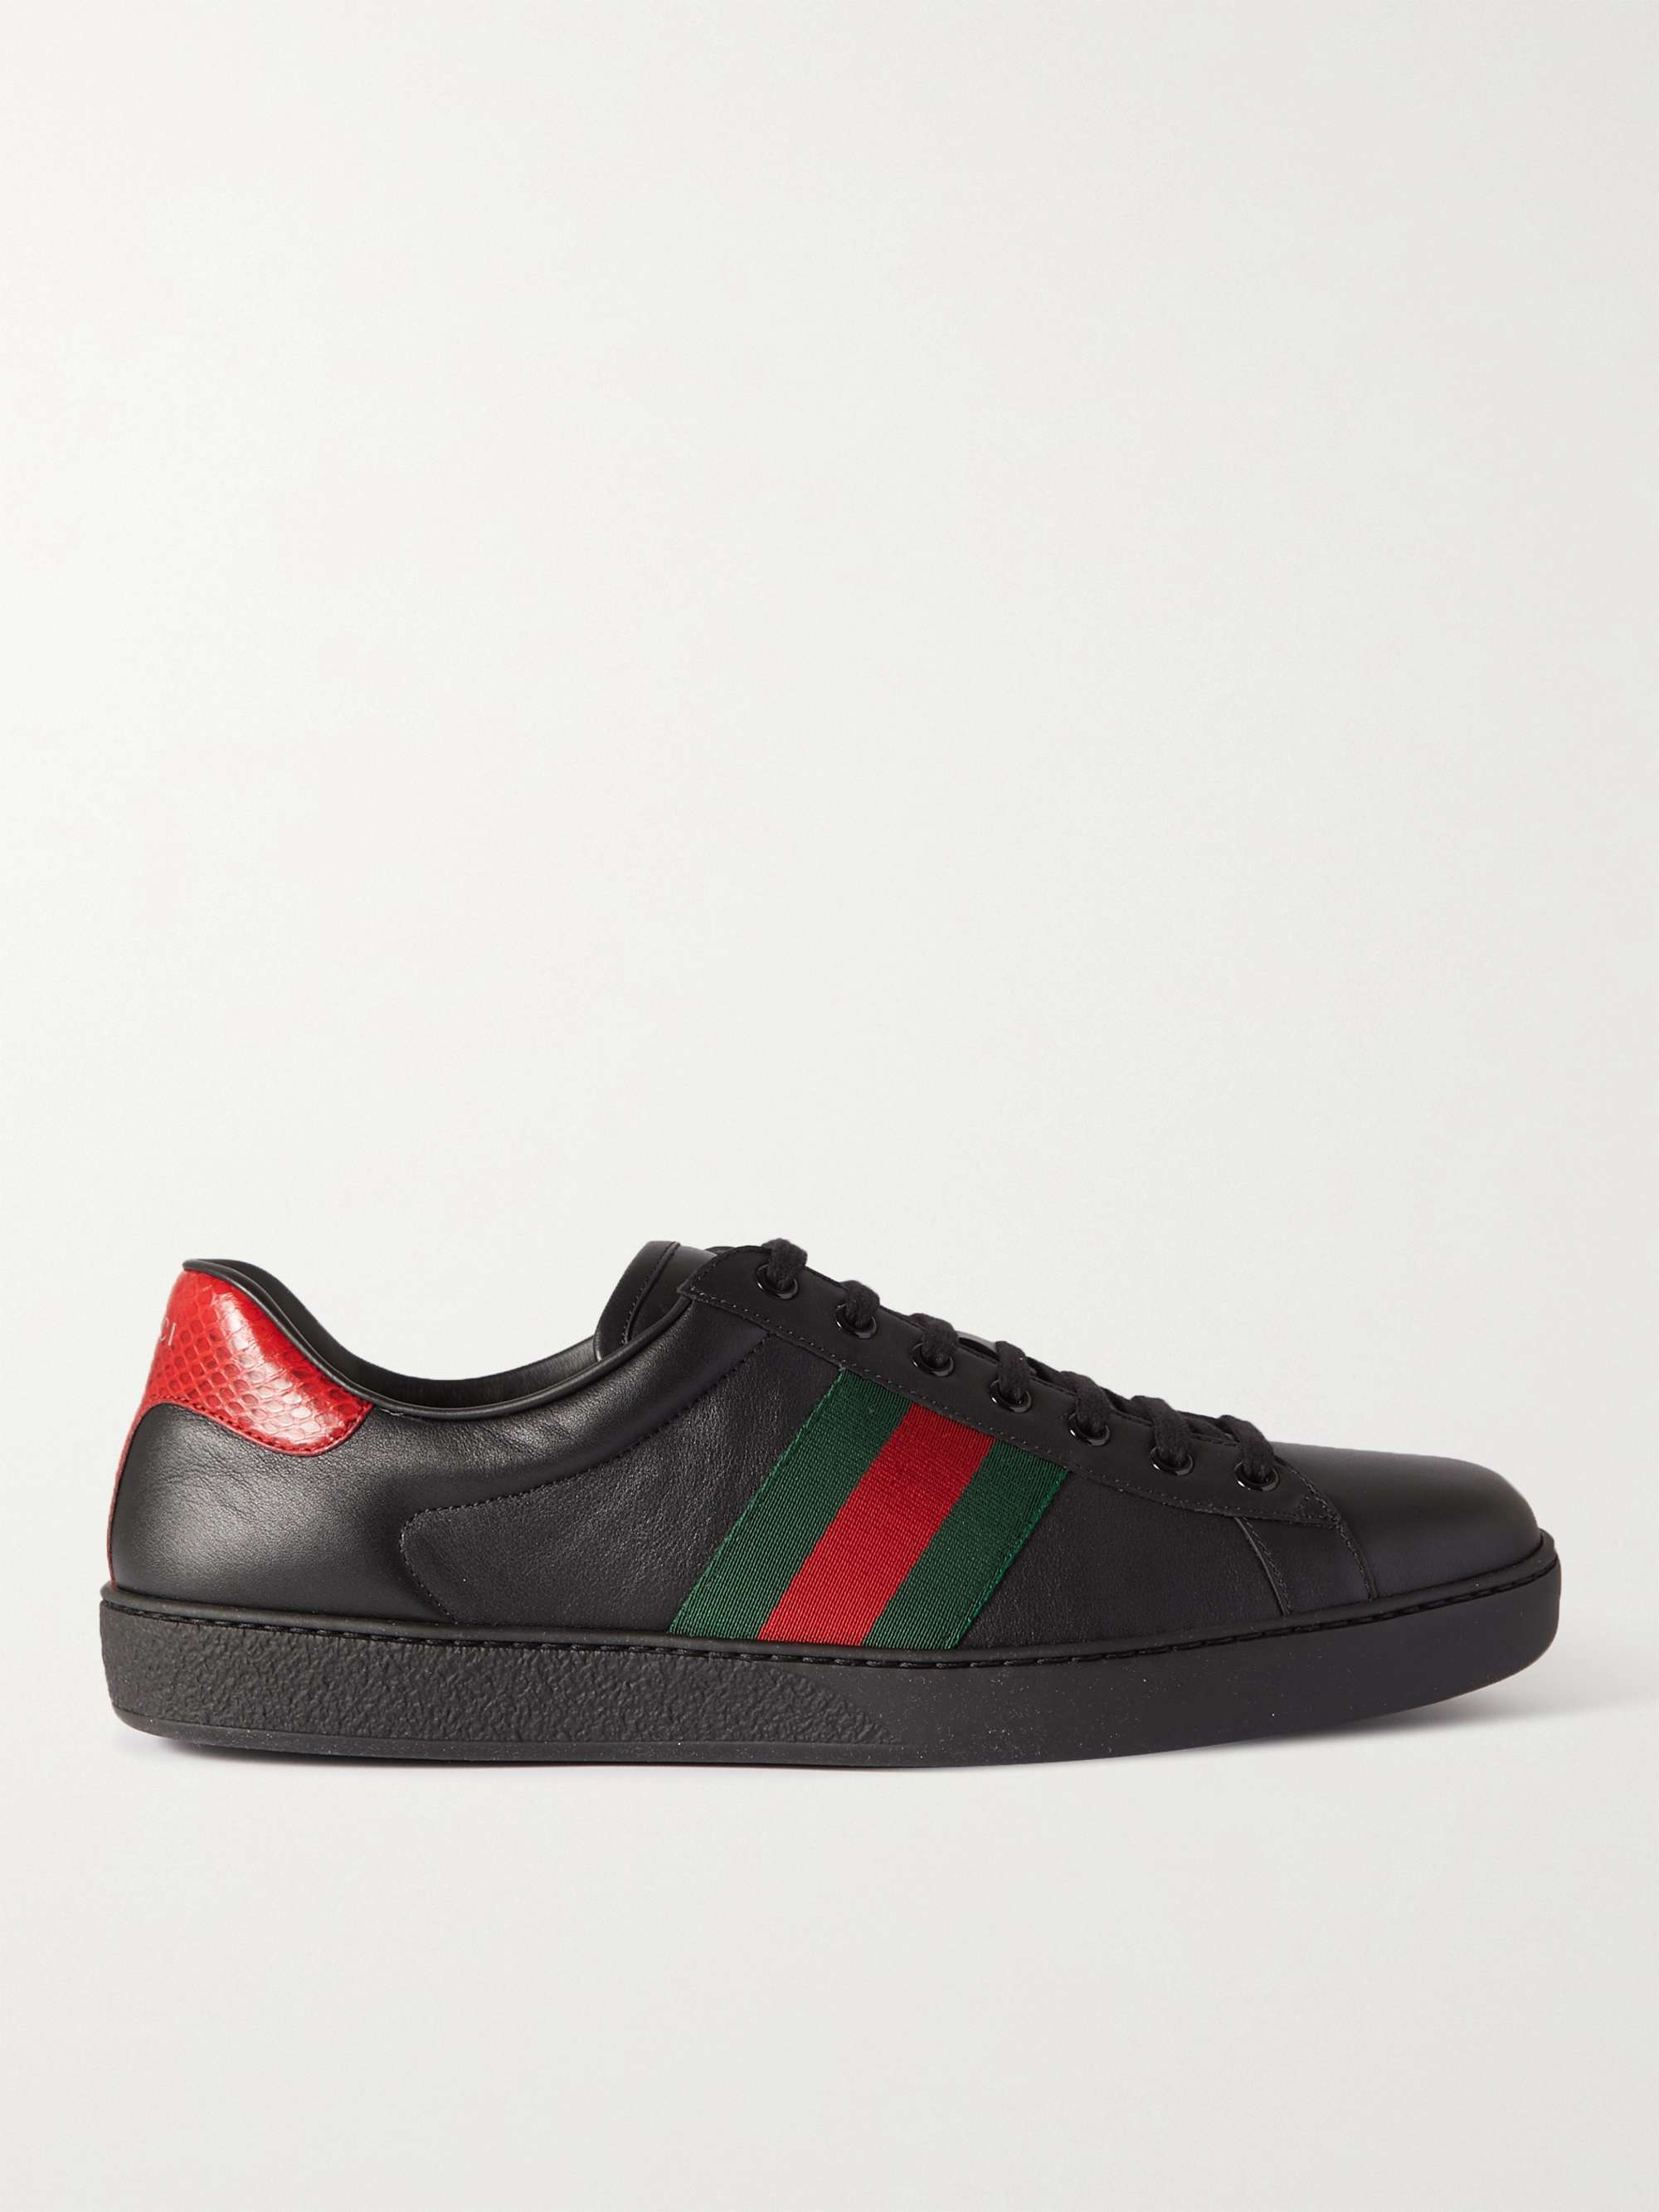 GUCCI Ace Faux Watersnake-Trimmed Leather Sneakers | MR PORTER